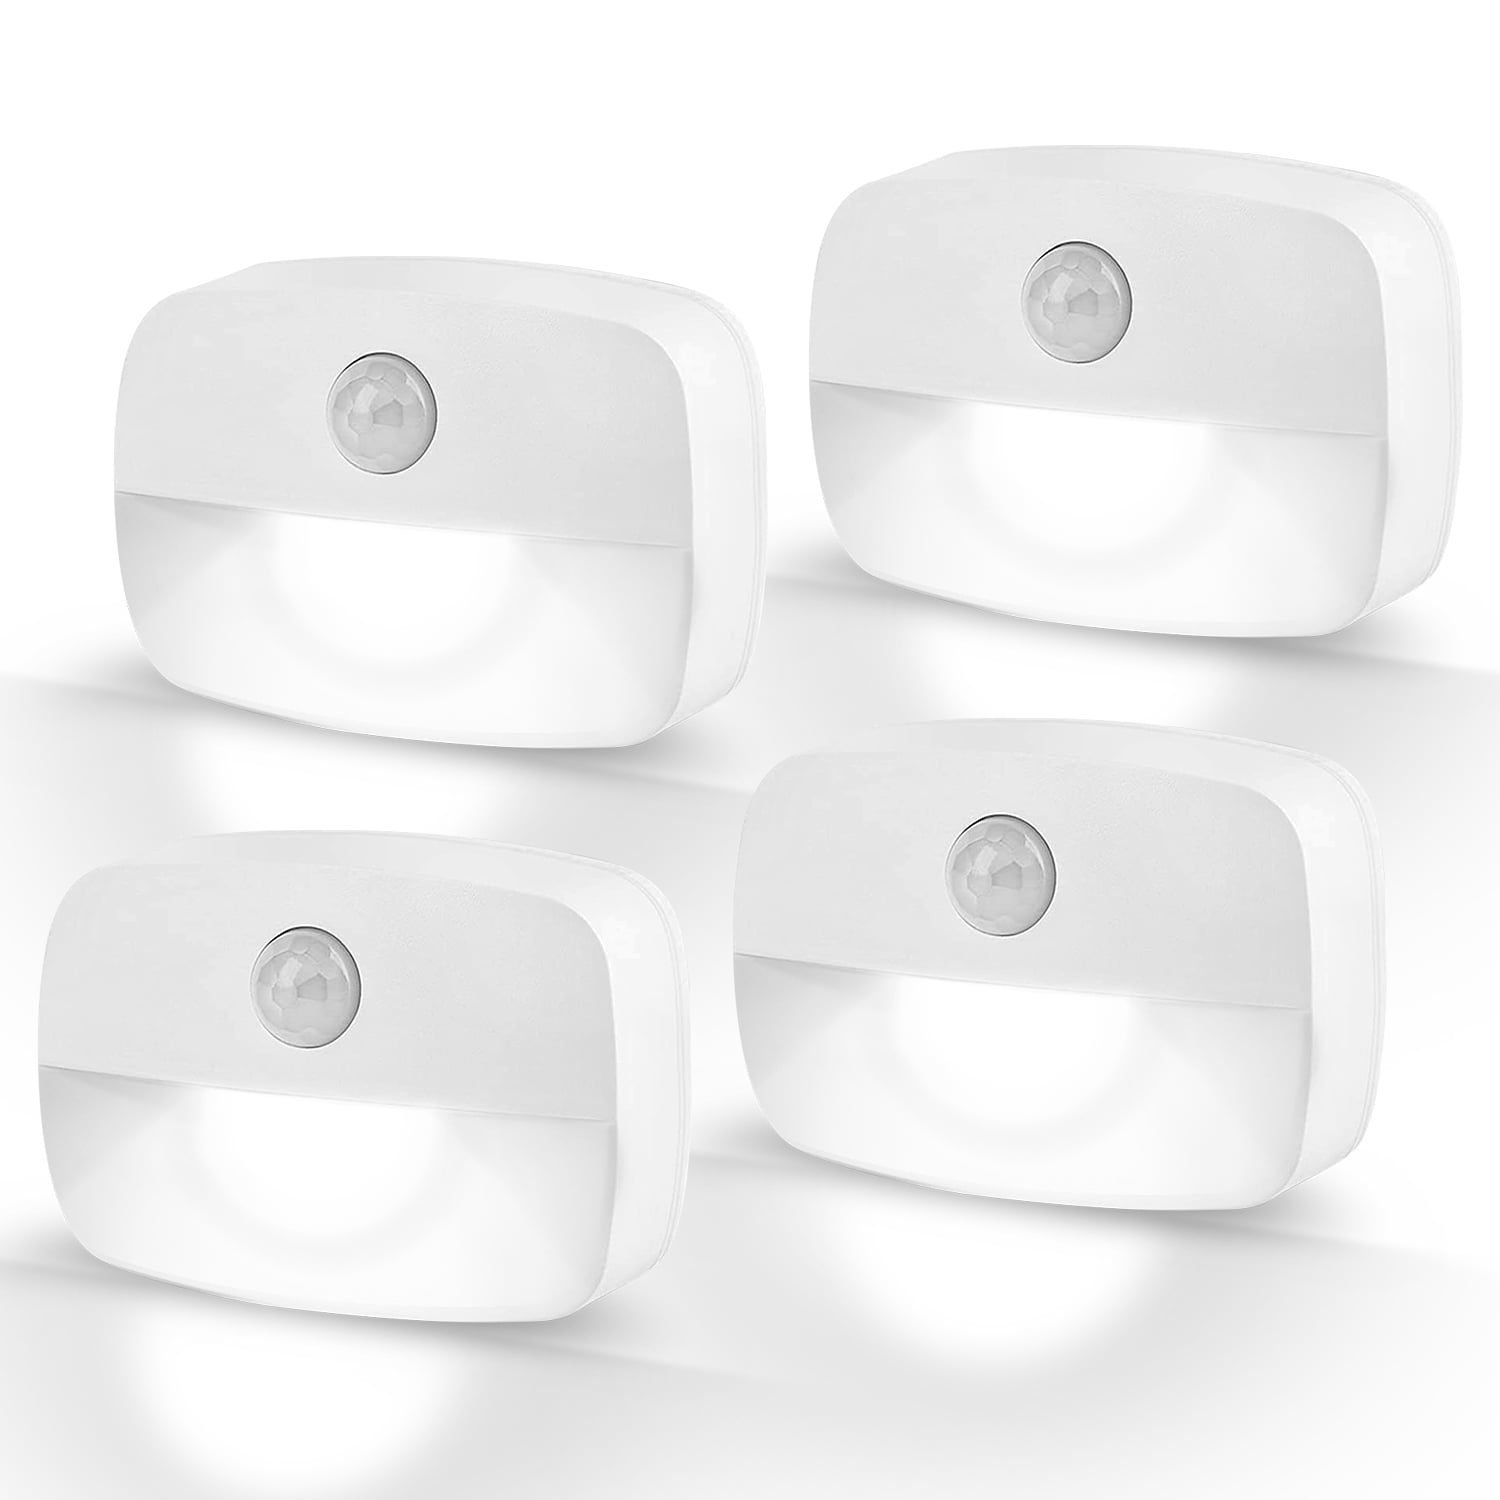 Hook Light - Battery Operated LED Motion Sensor Night Light - Motion Sensor  Courtesy Light - with 4 easy mounting options and 3 switch settings